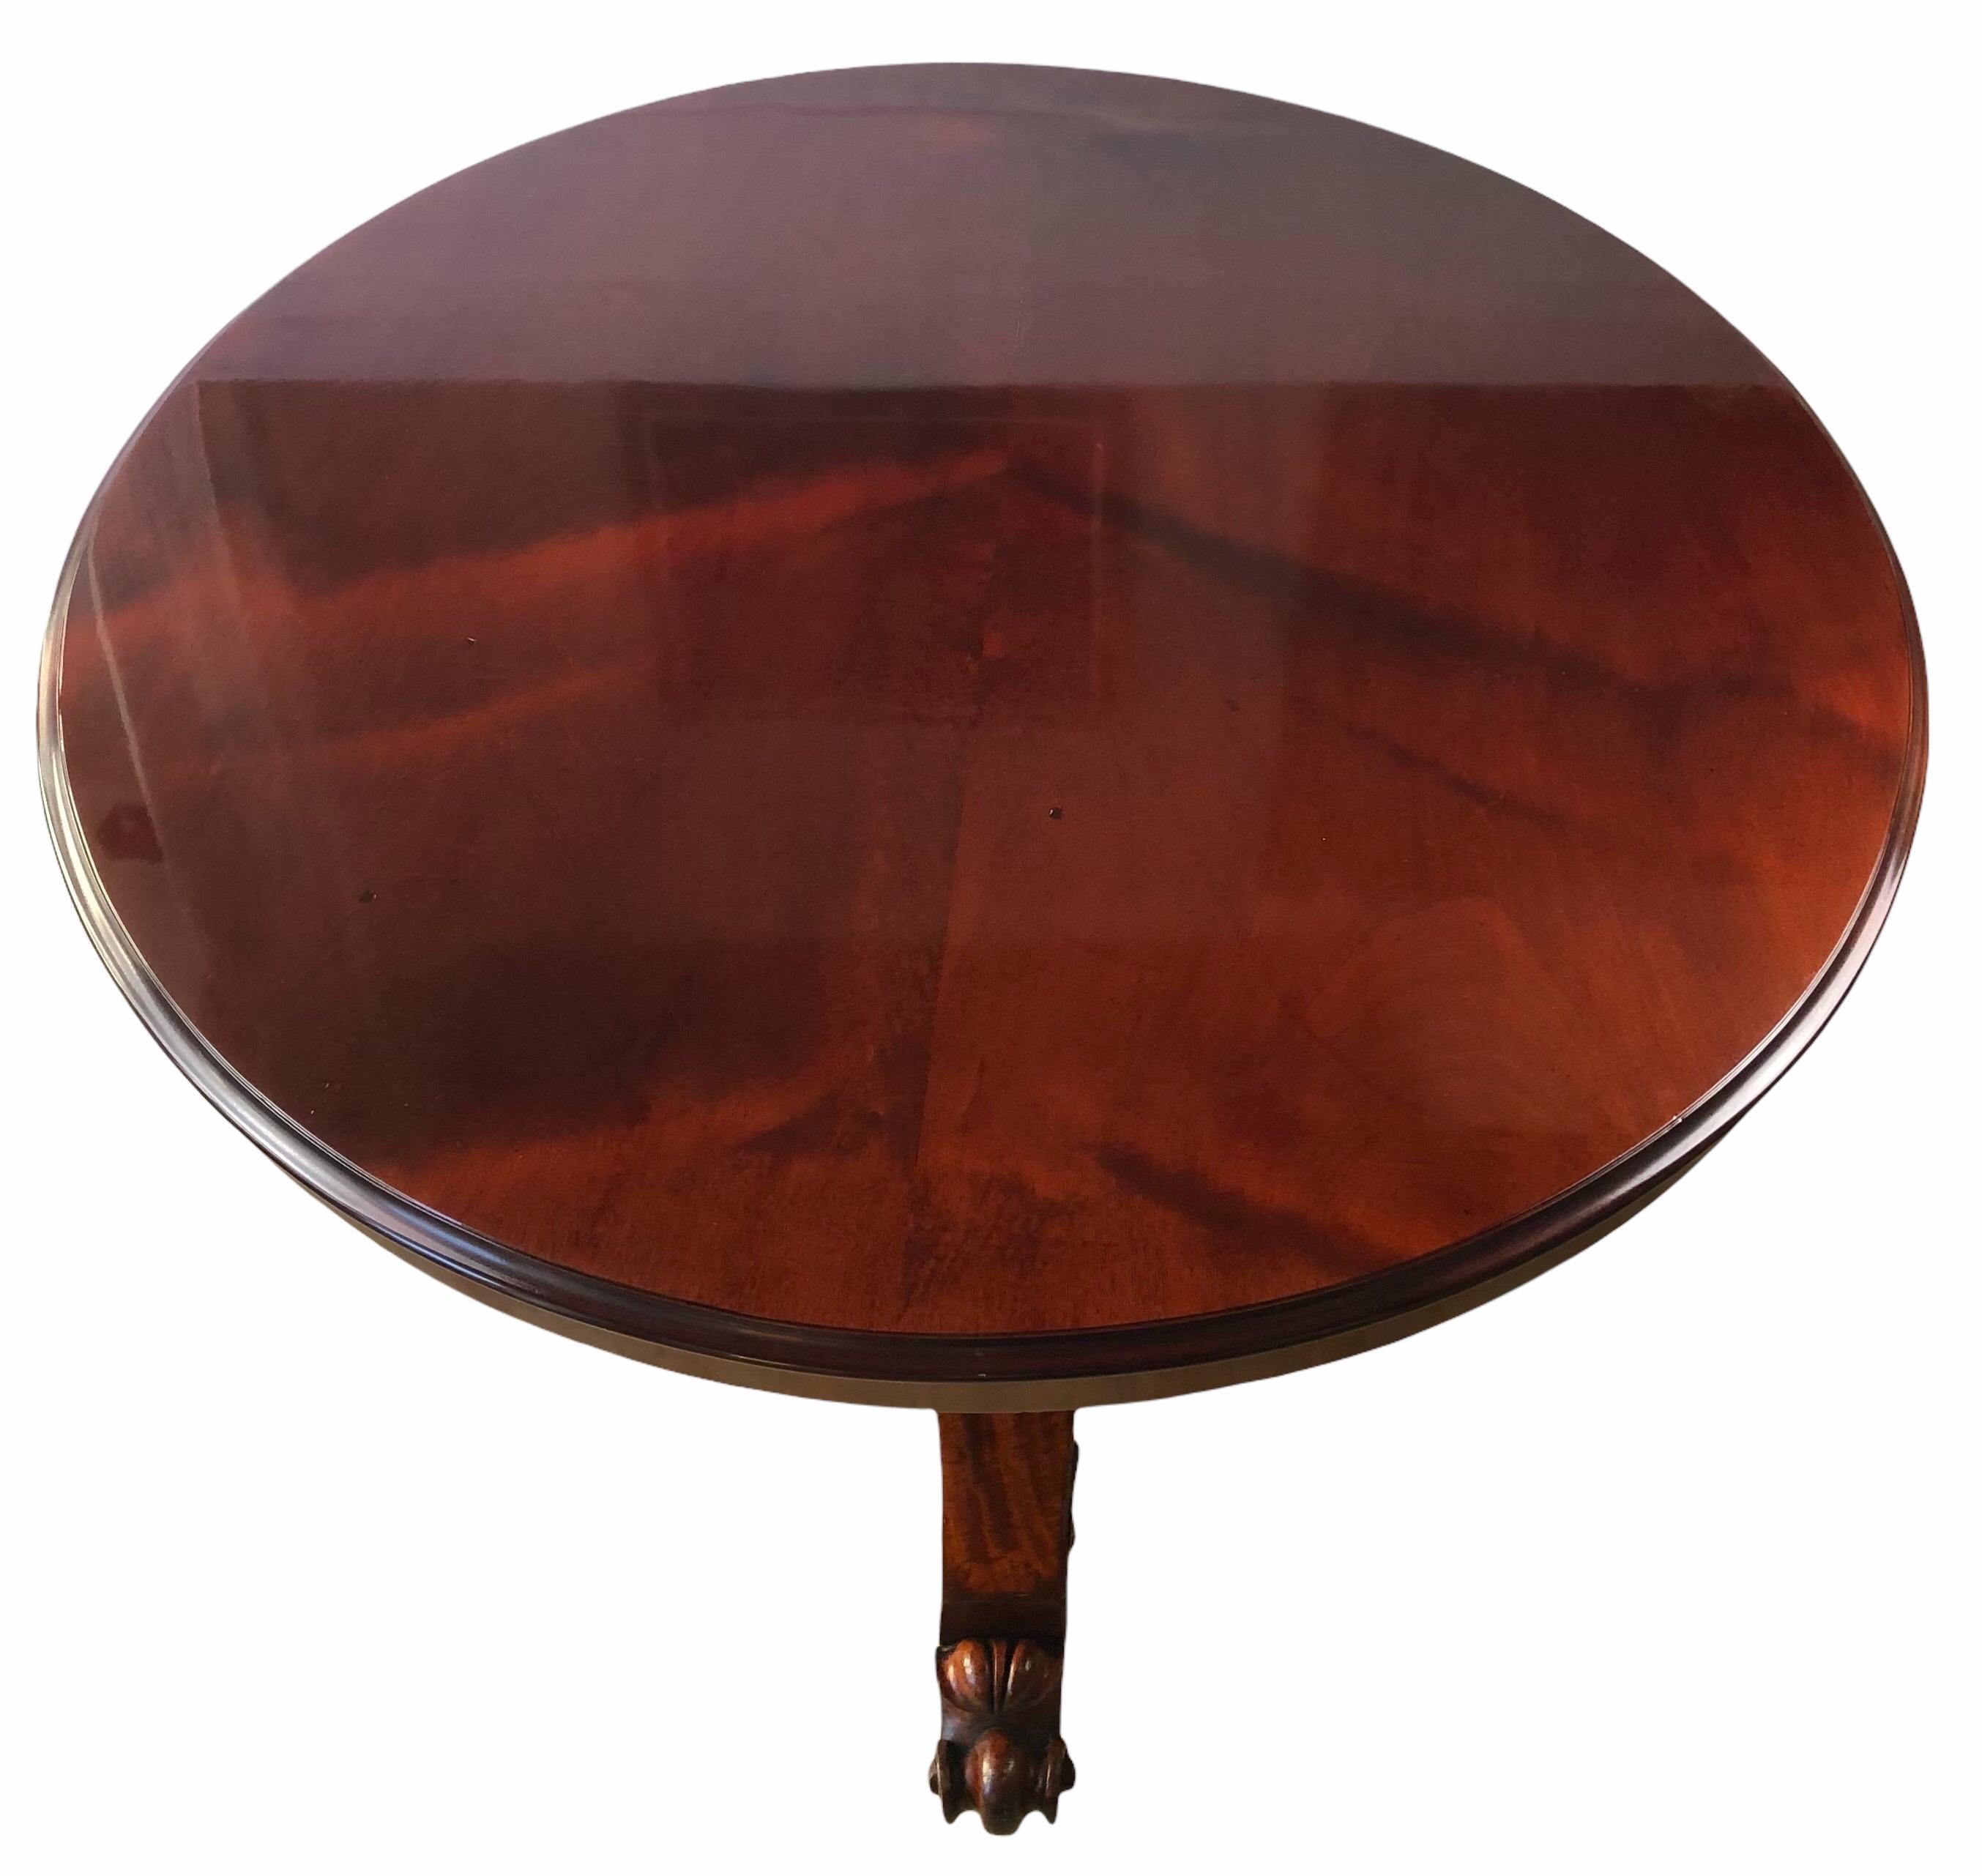 19th Century Victorian Tilt-Top Center Table, Large Round Mahogany Dining Table In Good Condition For Sale In Miami, FL